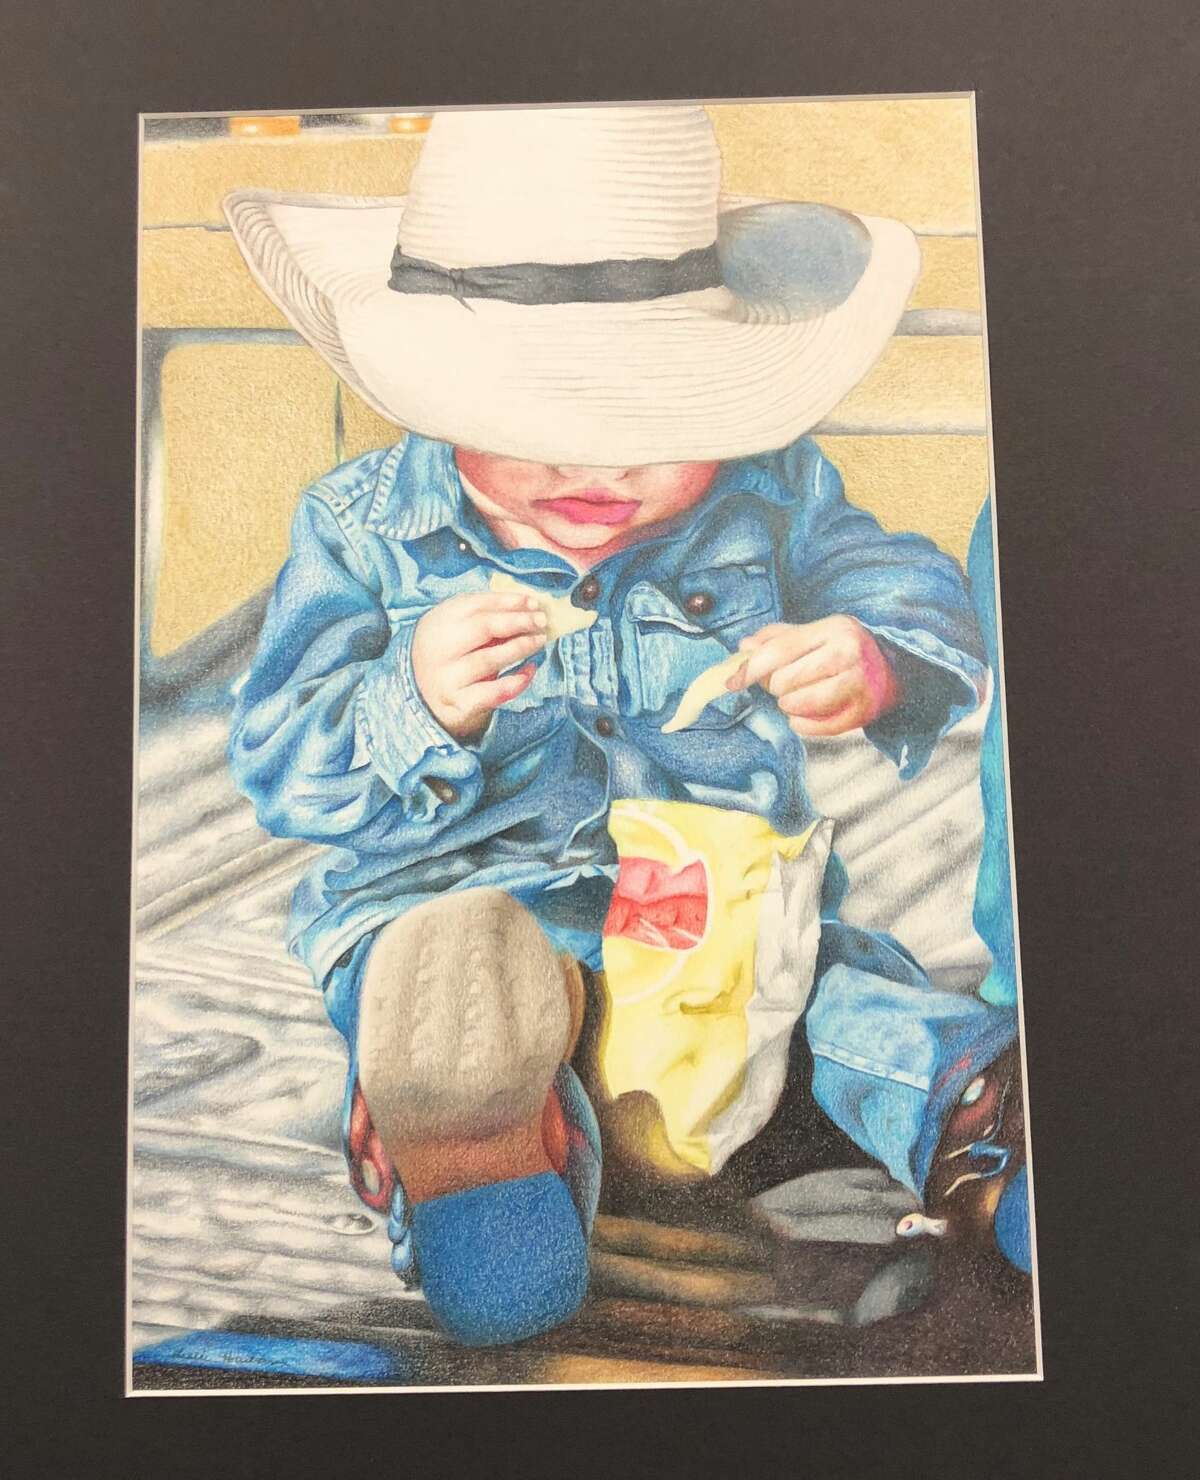 This piece of art by Leslie Hartman is the 2019 Congressional Art Competition winner for District 28.